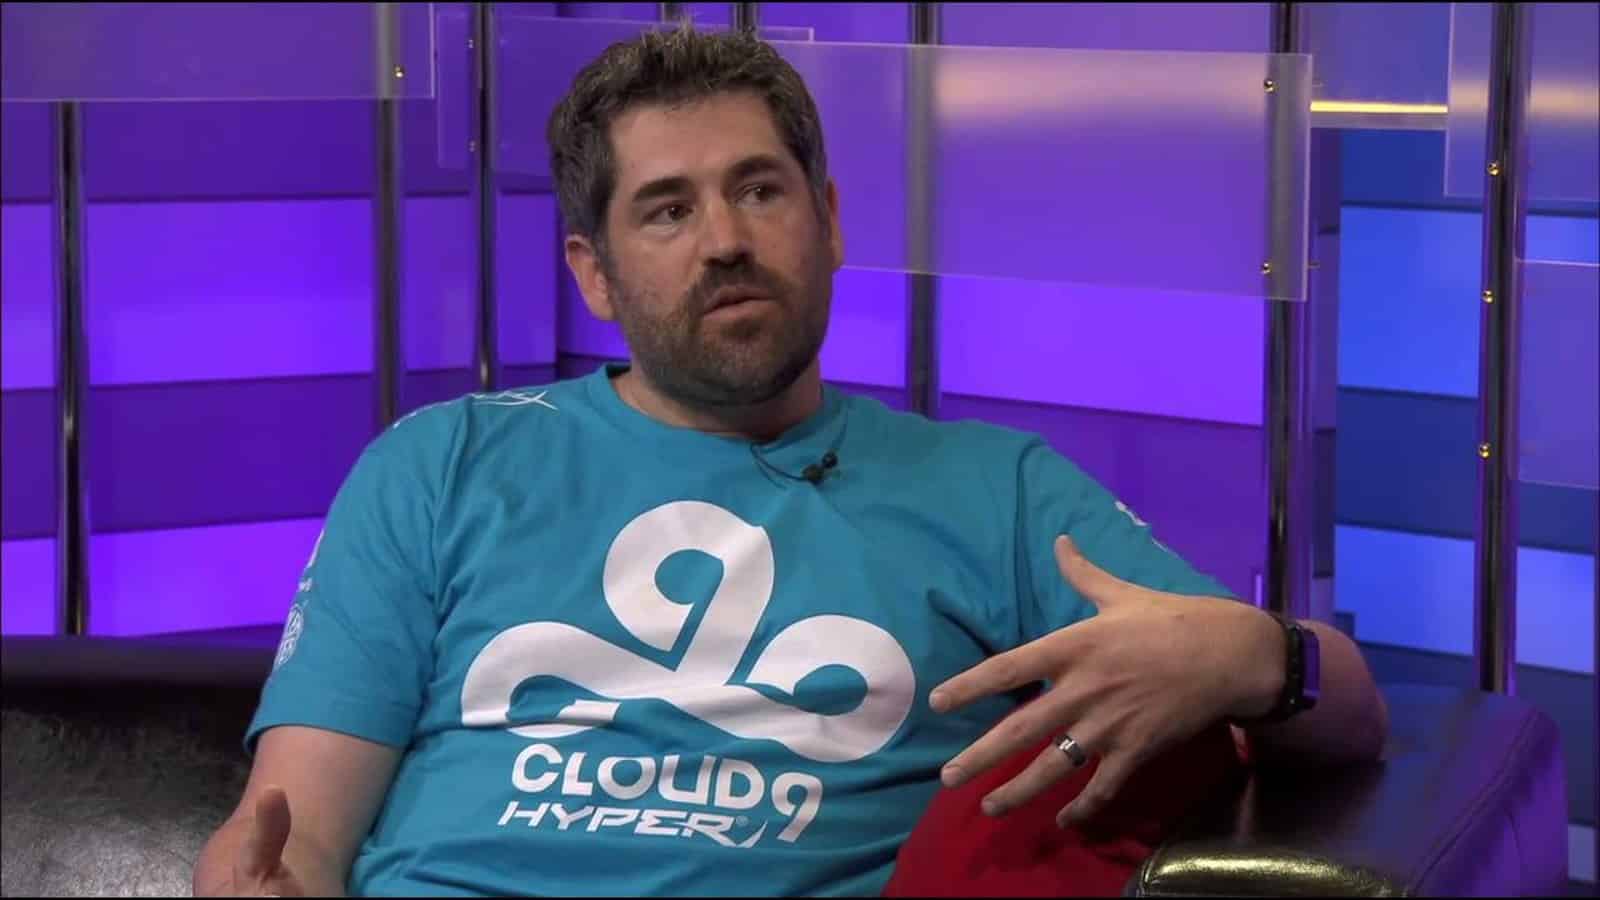 Cloud9 CEO admits org is "controlling costs" amid Valorant team rebuild - Dexerto